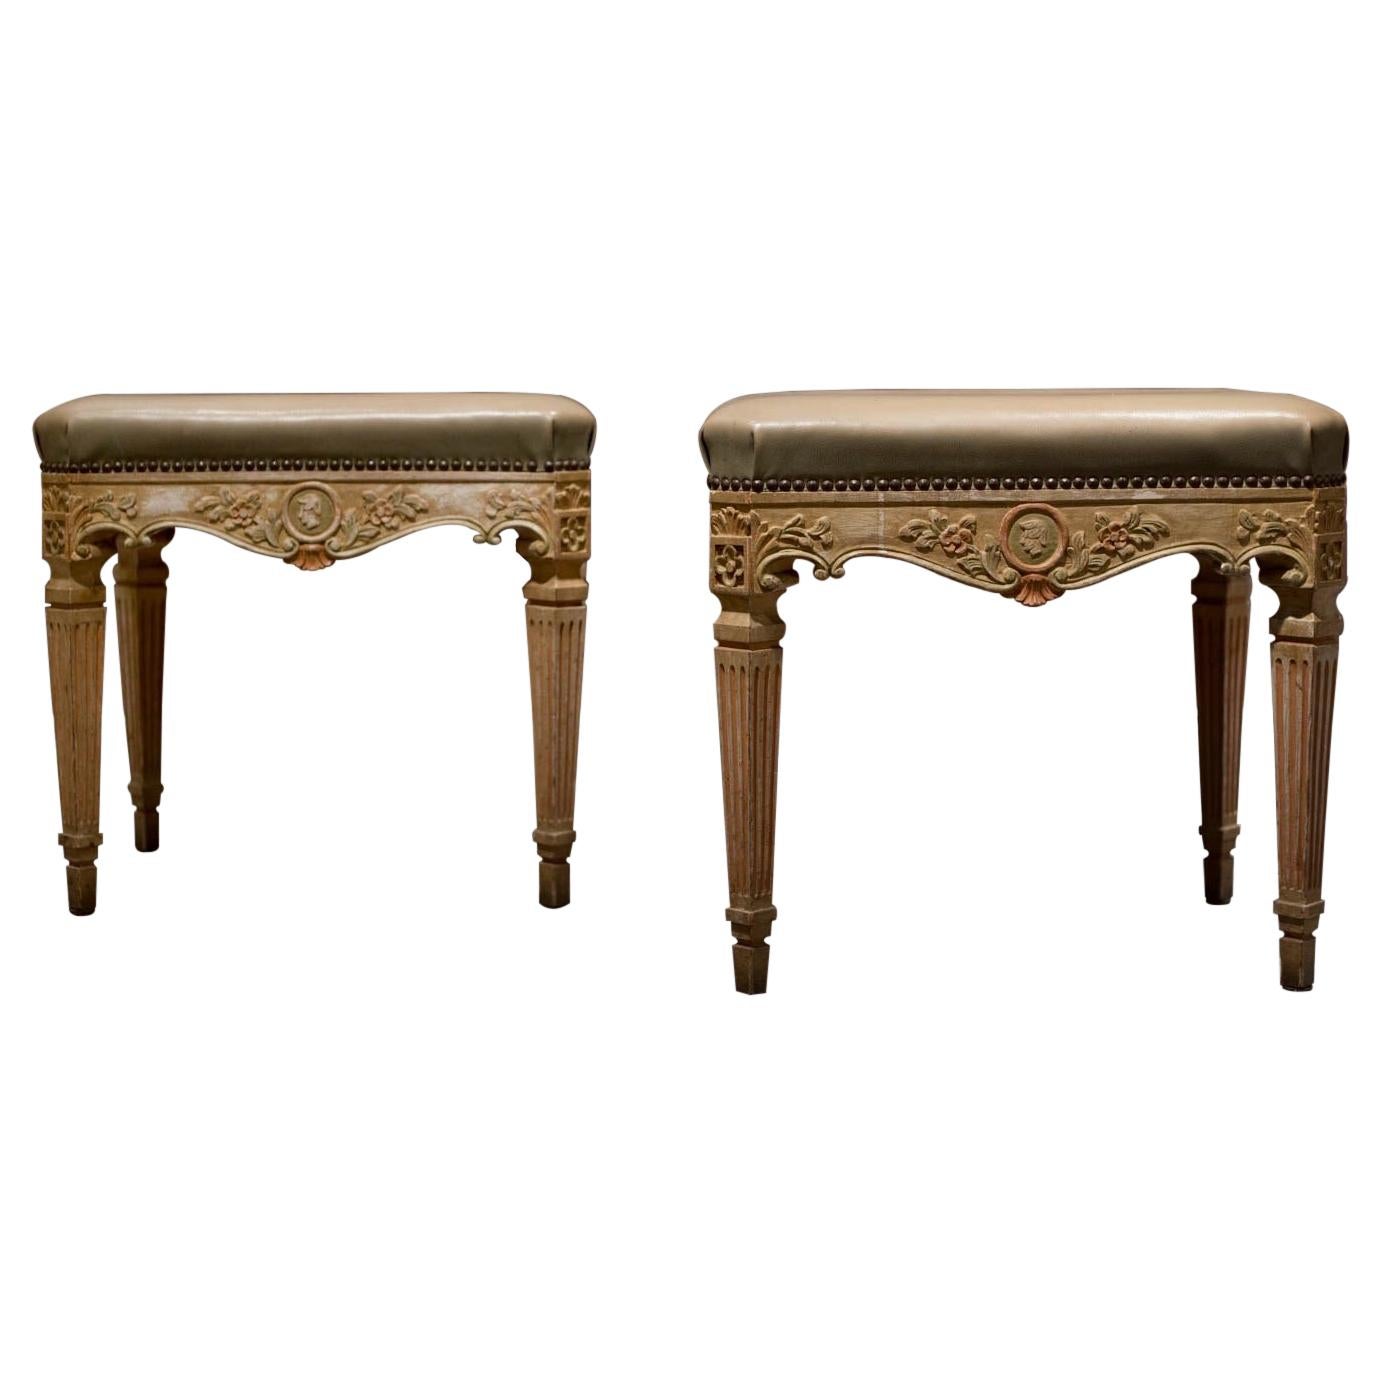 Pair of Period Italian Lacquered Wooden Benches 